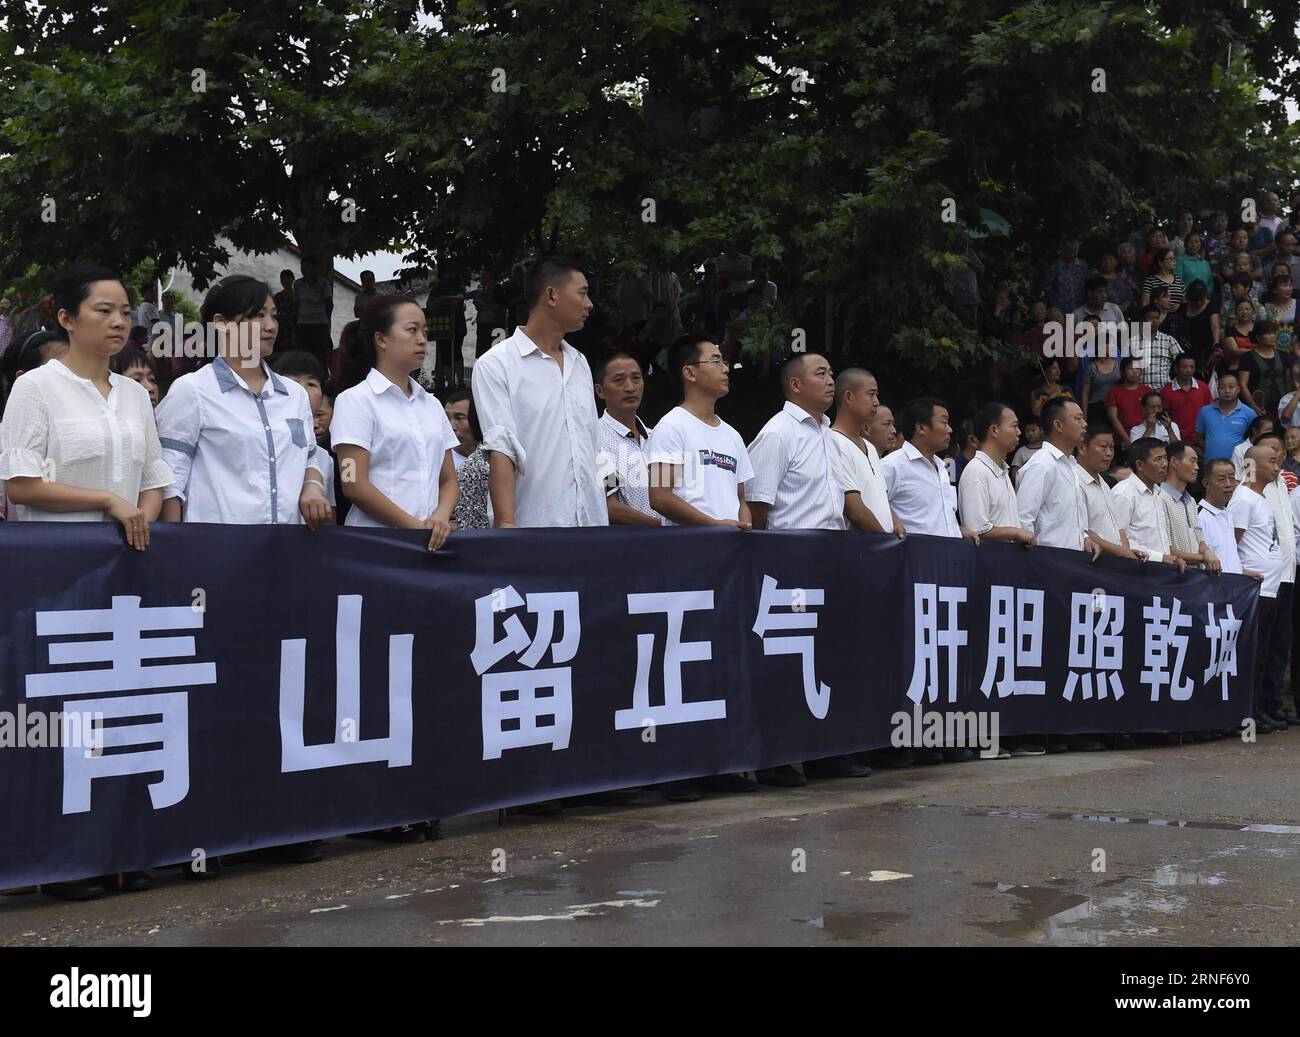 (160722) -- CHENGDU, July 22, 2016 -- People hold a banner to mourn for the deceased Chinese UN peacekeeper Li Lei during a ceremony to bury bone ash in Chengdu, capital of southwest China s Sichuan Province, July 22, 2016. Li Lei and Yang Shupeng were killed on the evening of July 10 after a mortar shell hit their armored vehicle during fighting between two army factions in Juba, capital of South Sudan. ) (lfj) CHINA-SICHUAN-CHINESE UN PEACEKEEPER-MOURNING (CN) LiuxKun PUBLICATIONxNOTxINxCHN   160722 Chengdu July 22 2016 Celebrities Hold a Banner to Morne for The deceased Chinese UN Peacekeep Stock Photo